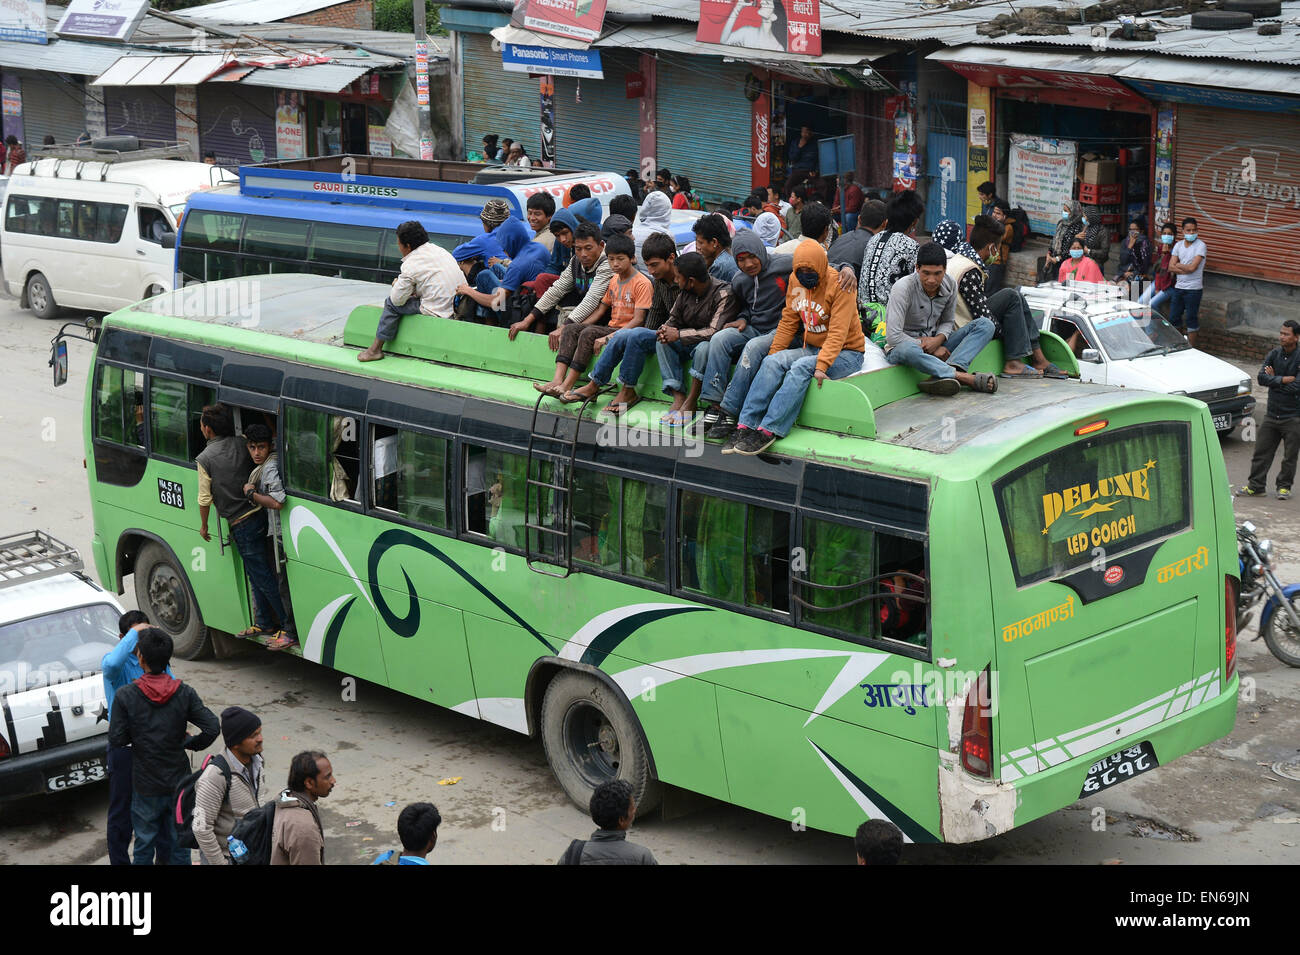 People travel unsafely on the roof of public bus at Kalanki Chowk in Kathmandu, Nepal, 28 April 2015. Thousands of people are flocking to Kathmandu's exit points to leave the city. A sheer number of people fleeing danger zones or looking for relatives is pushing the national transportation infrastructure to its limits. The highway remains clogged in many areas, officials said, with very limited food and water available at highway stalls. Photo: Subel Bhandari dpa (zu dpa-Korr '«Erdbeben mit Hunderttausenden Flüchtlingen überfordert Nepal' vom 28.04.2015) Stock Photo